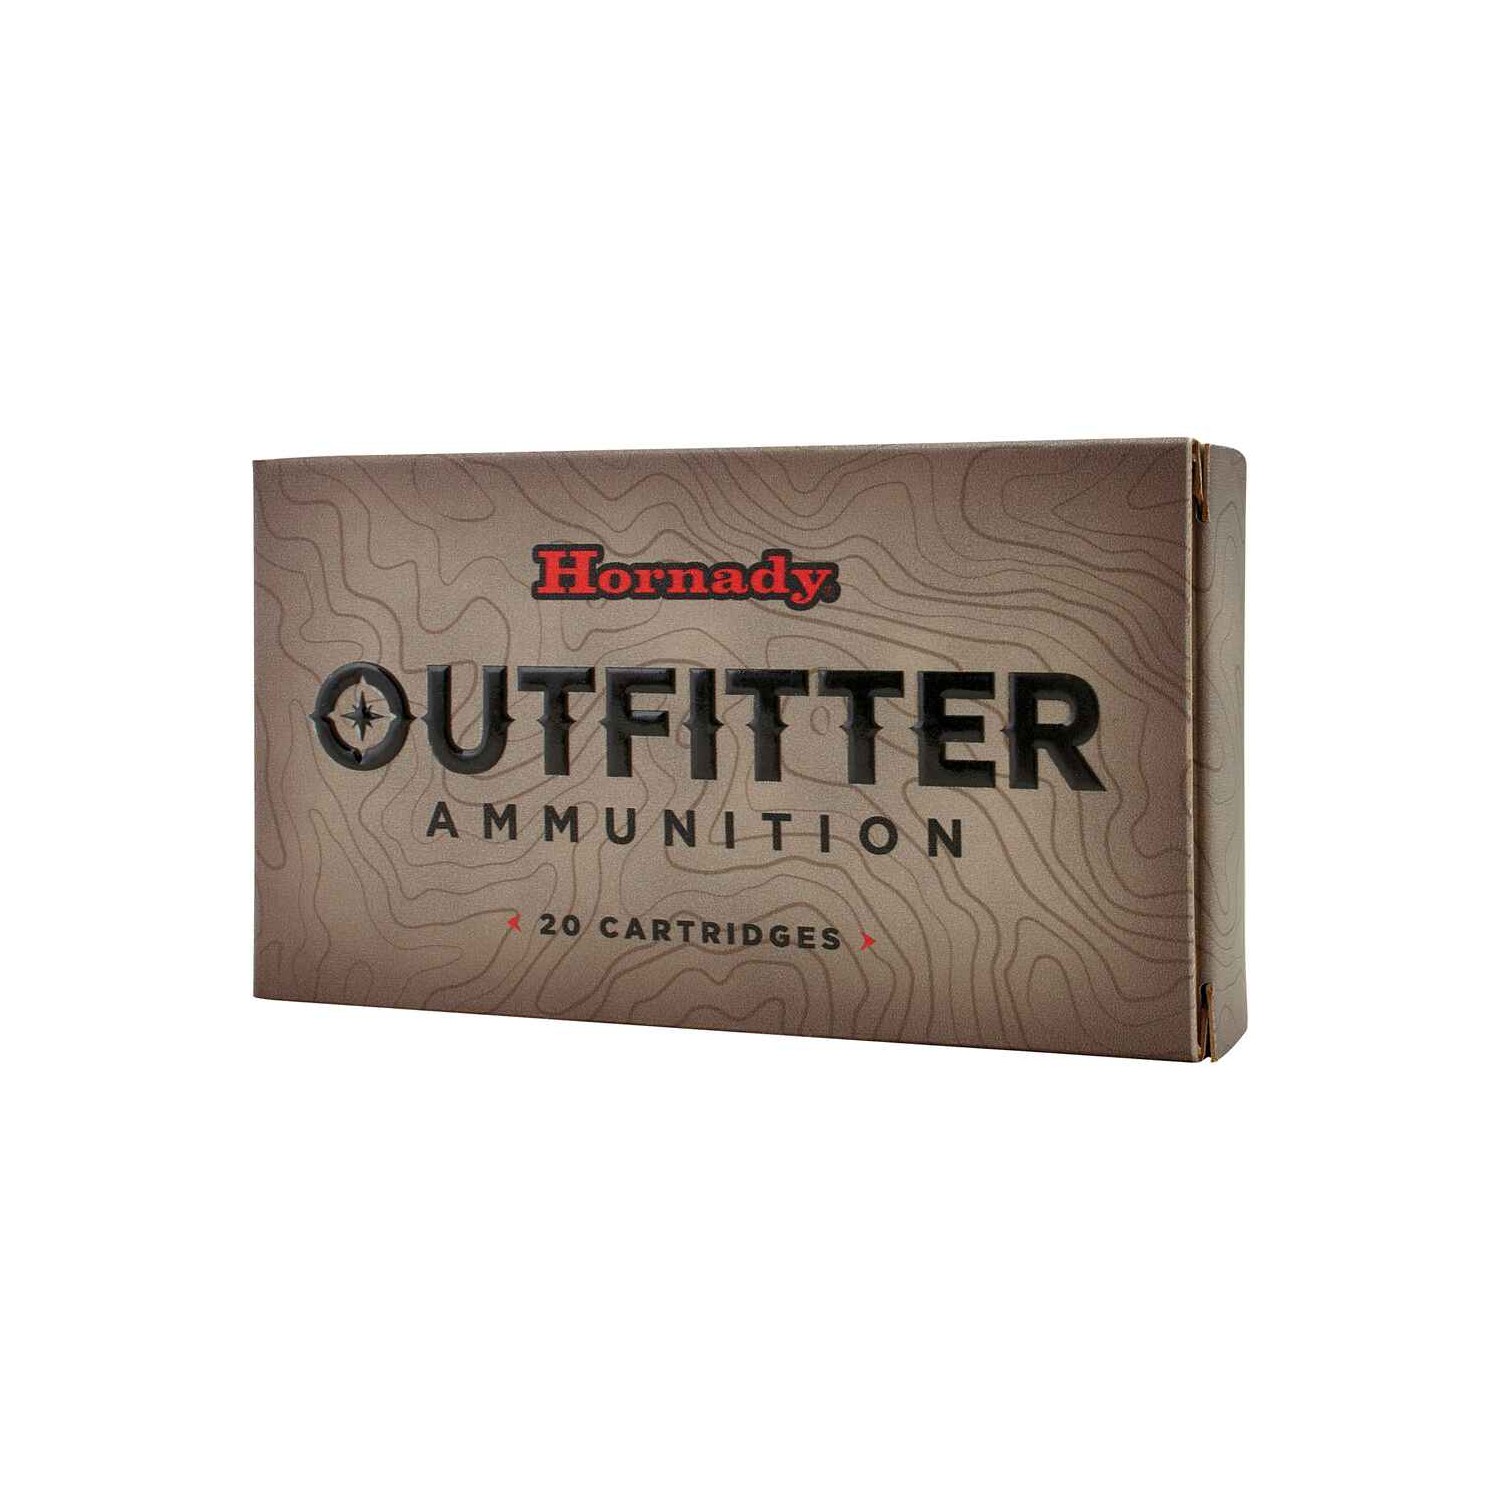 .375 H&H Mag. Outfitter GMX 16,2g/250grs. Hornady